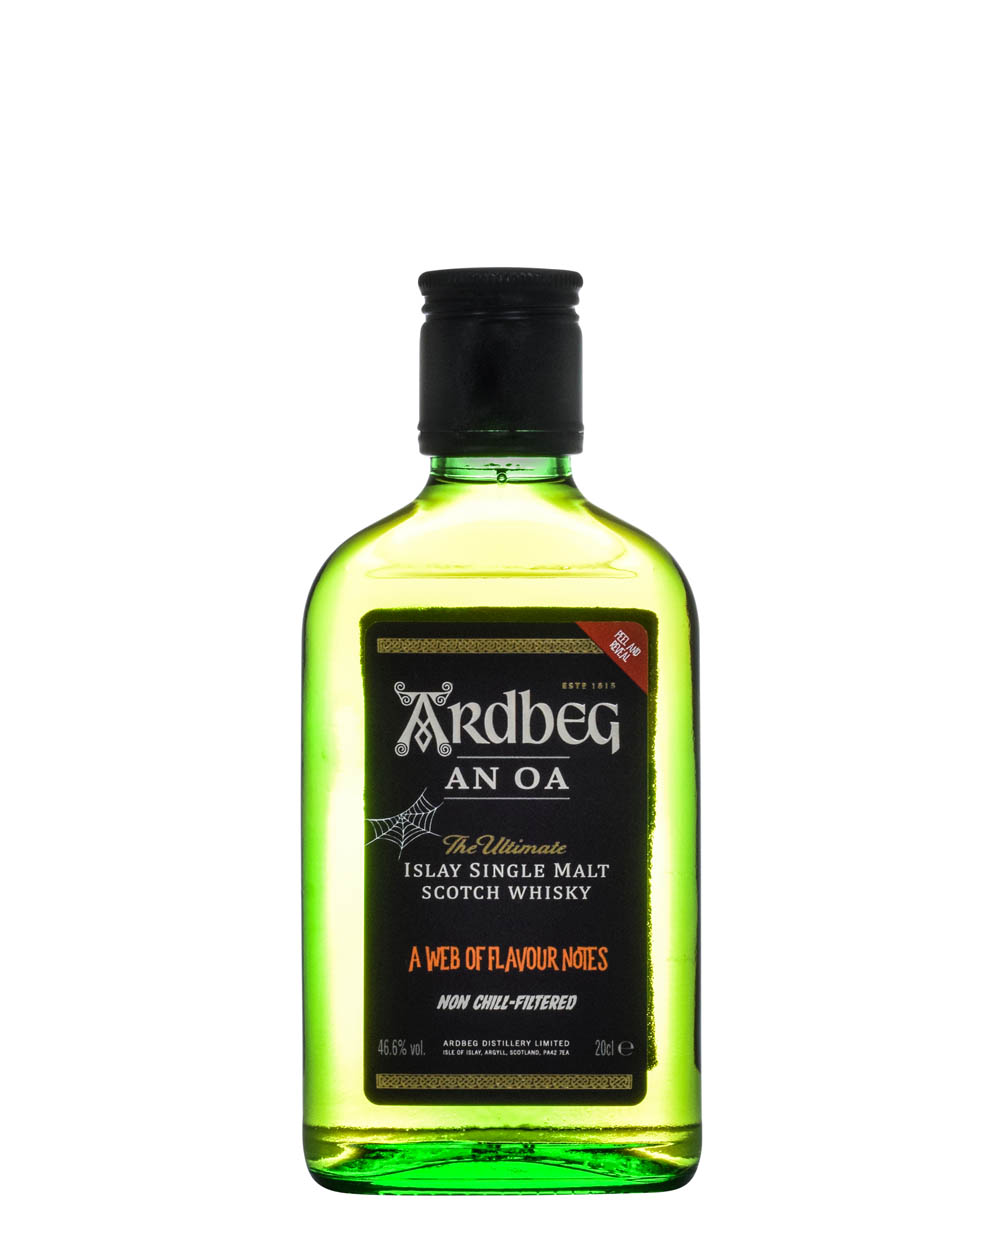 Ardbeg The Three Monsters Of Smoke C Musthave Malts MHM